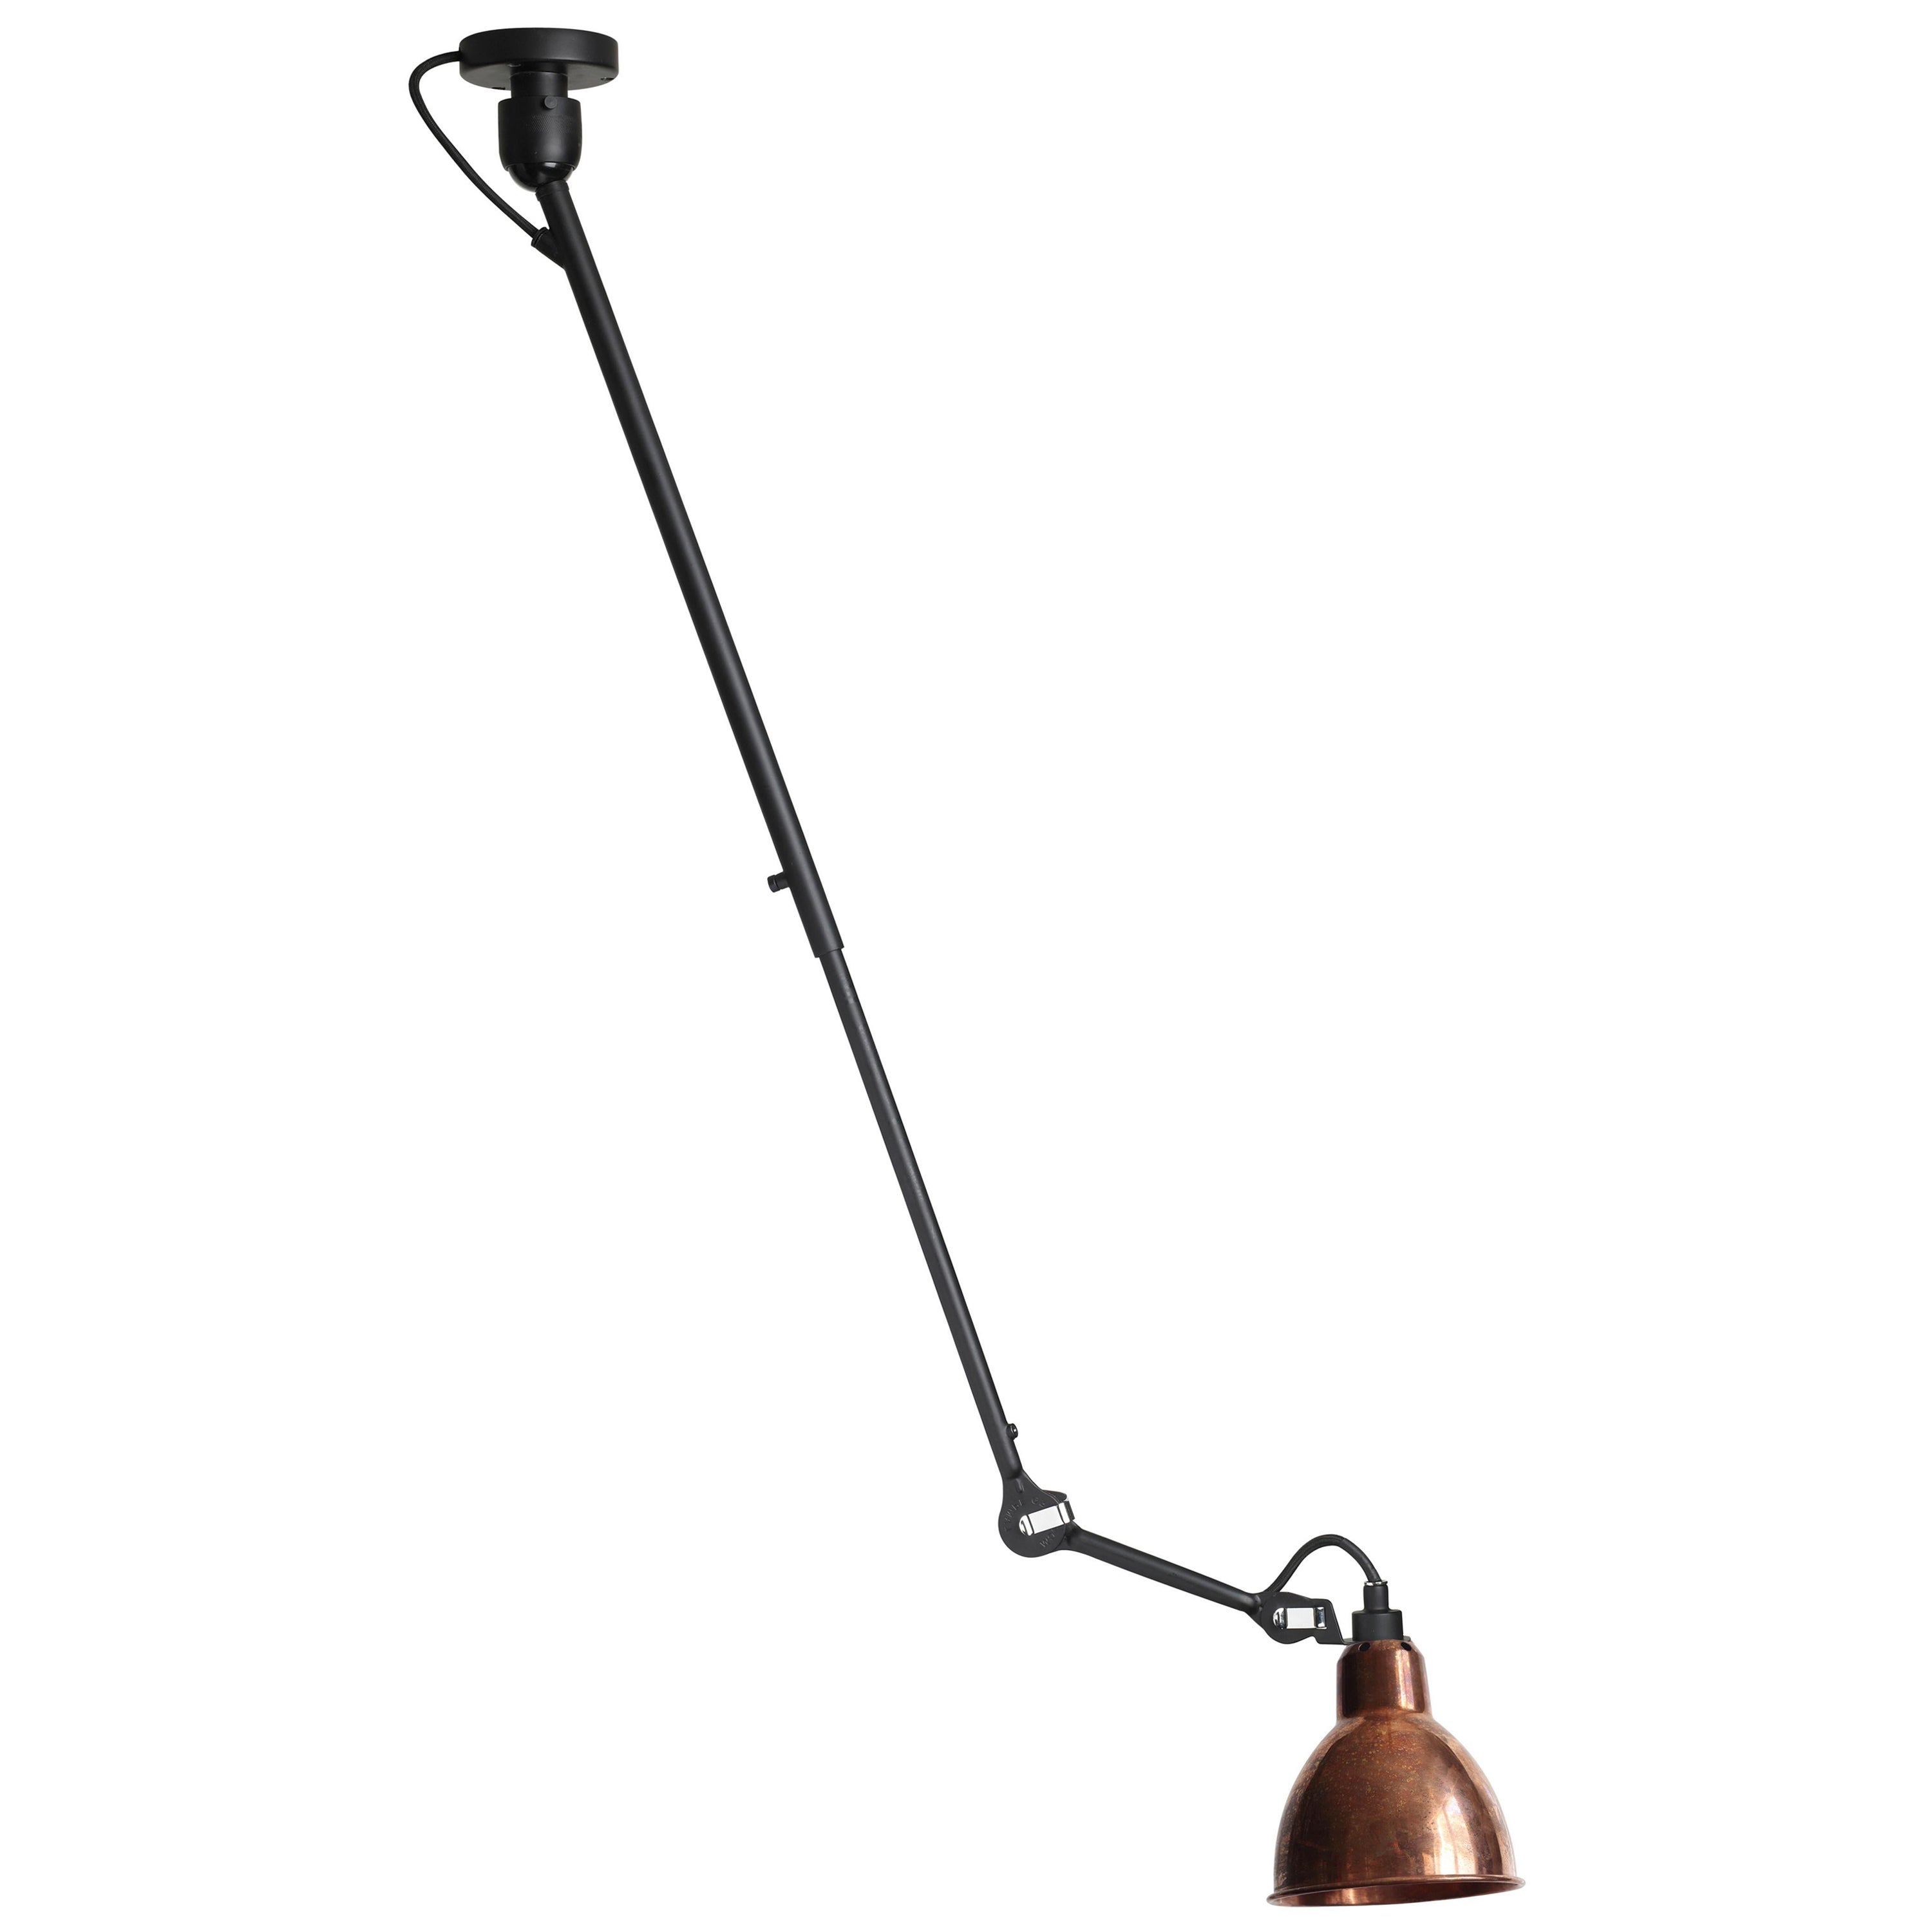 DCW Editions La Lampe Gras N°302 Pendant Light in Black Arm and Raw Copper Shade For Sale